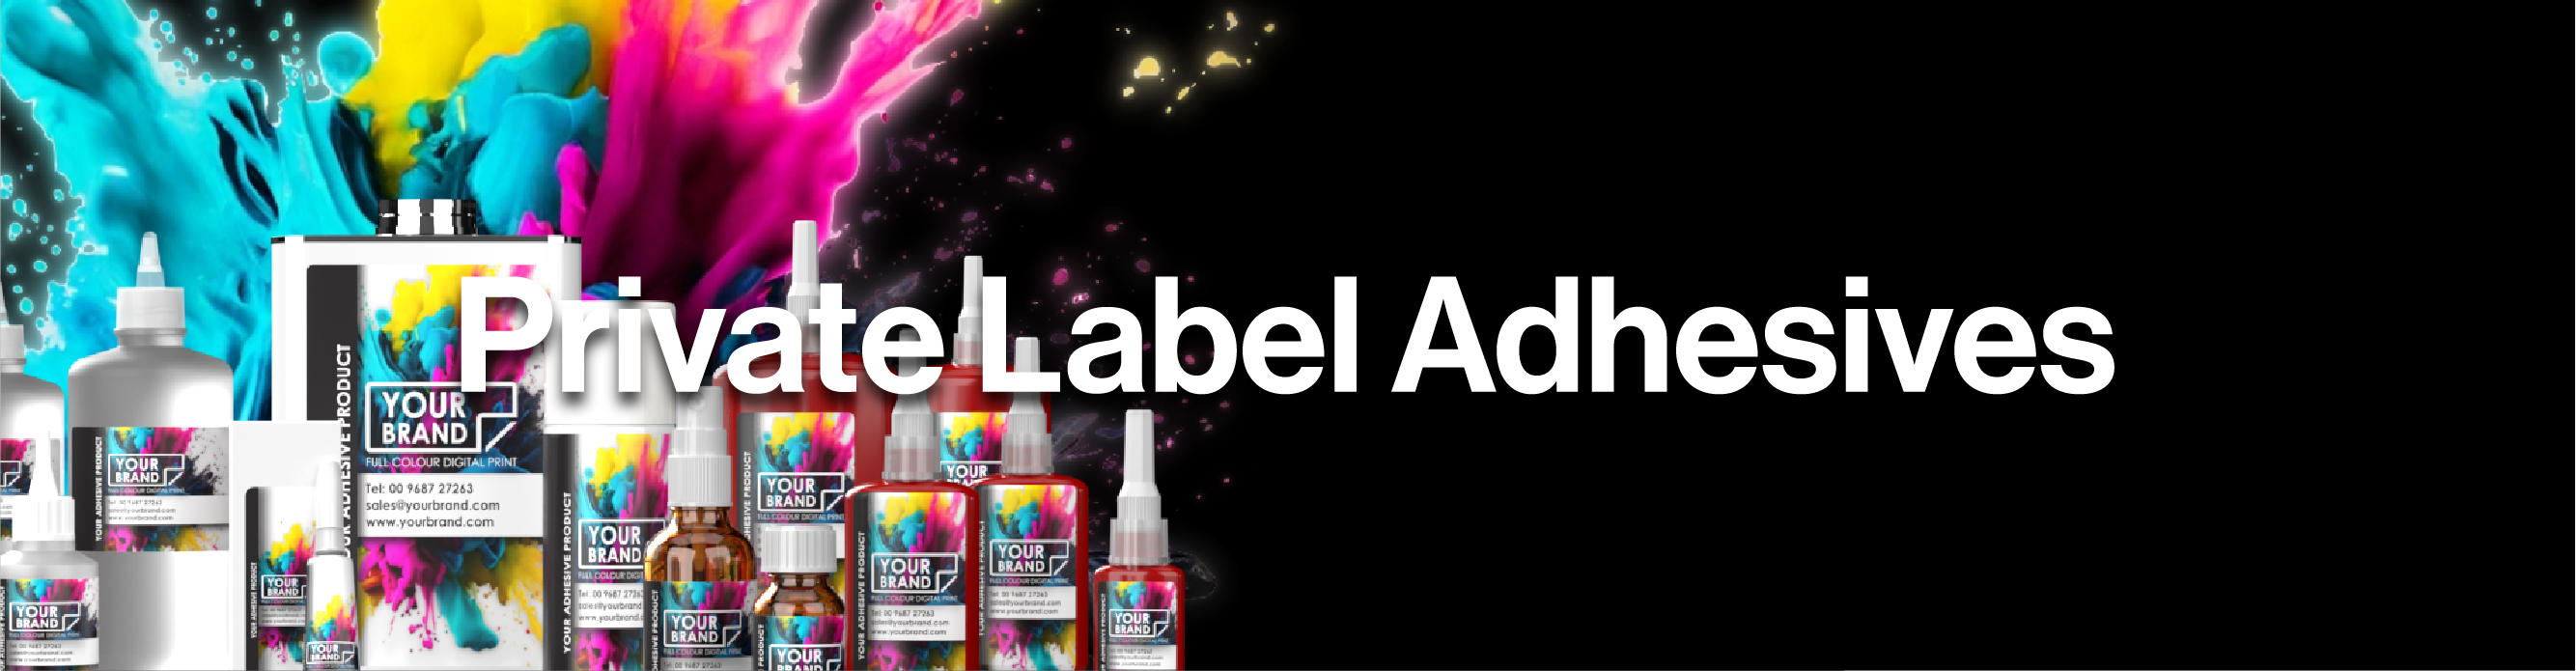 Private Label Adhesives Banner